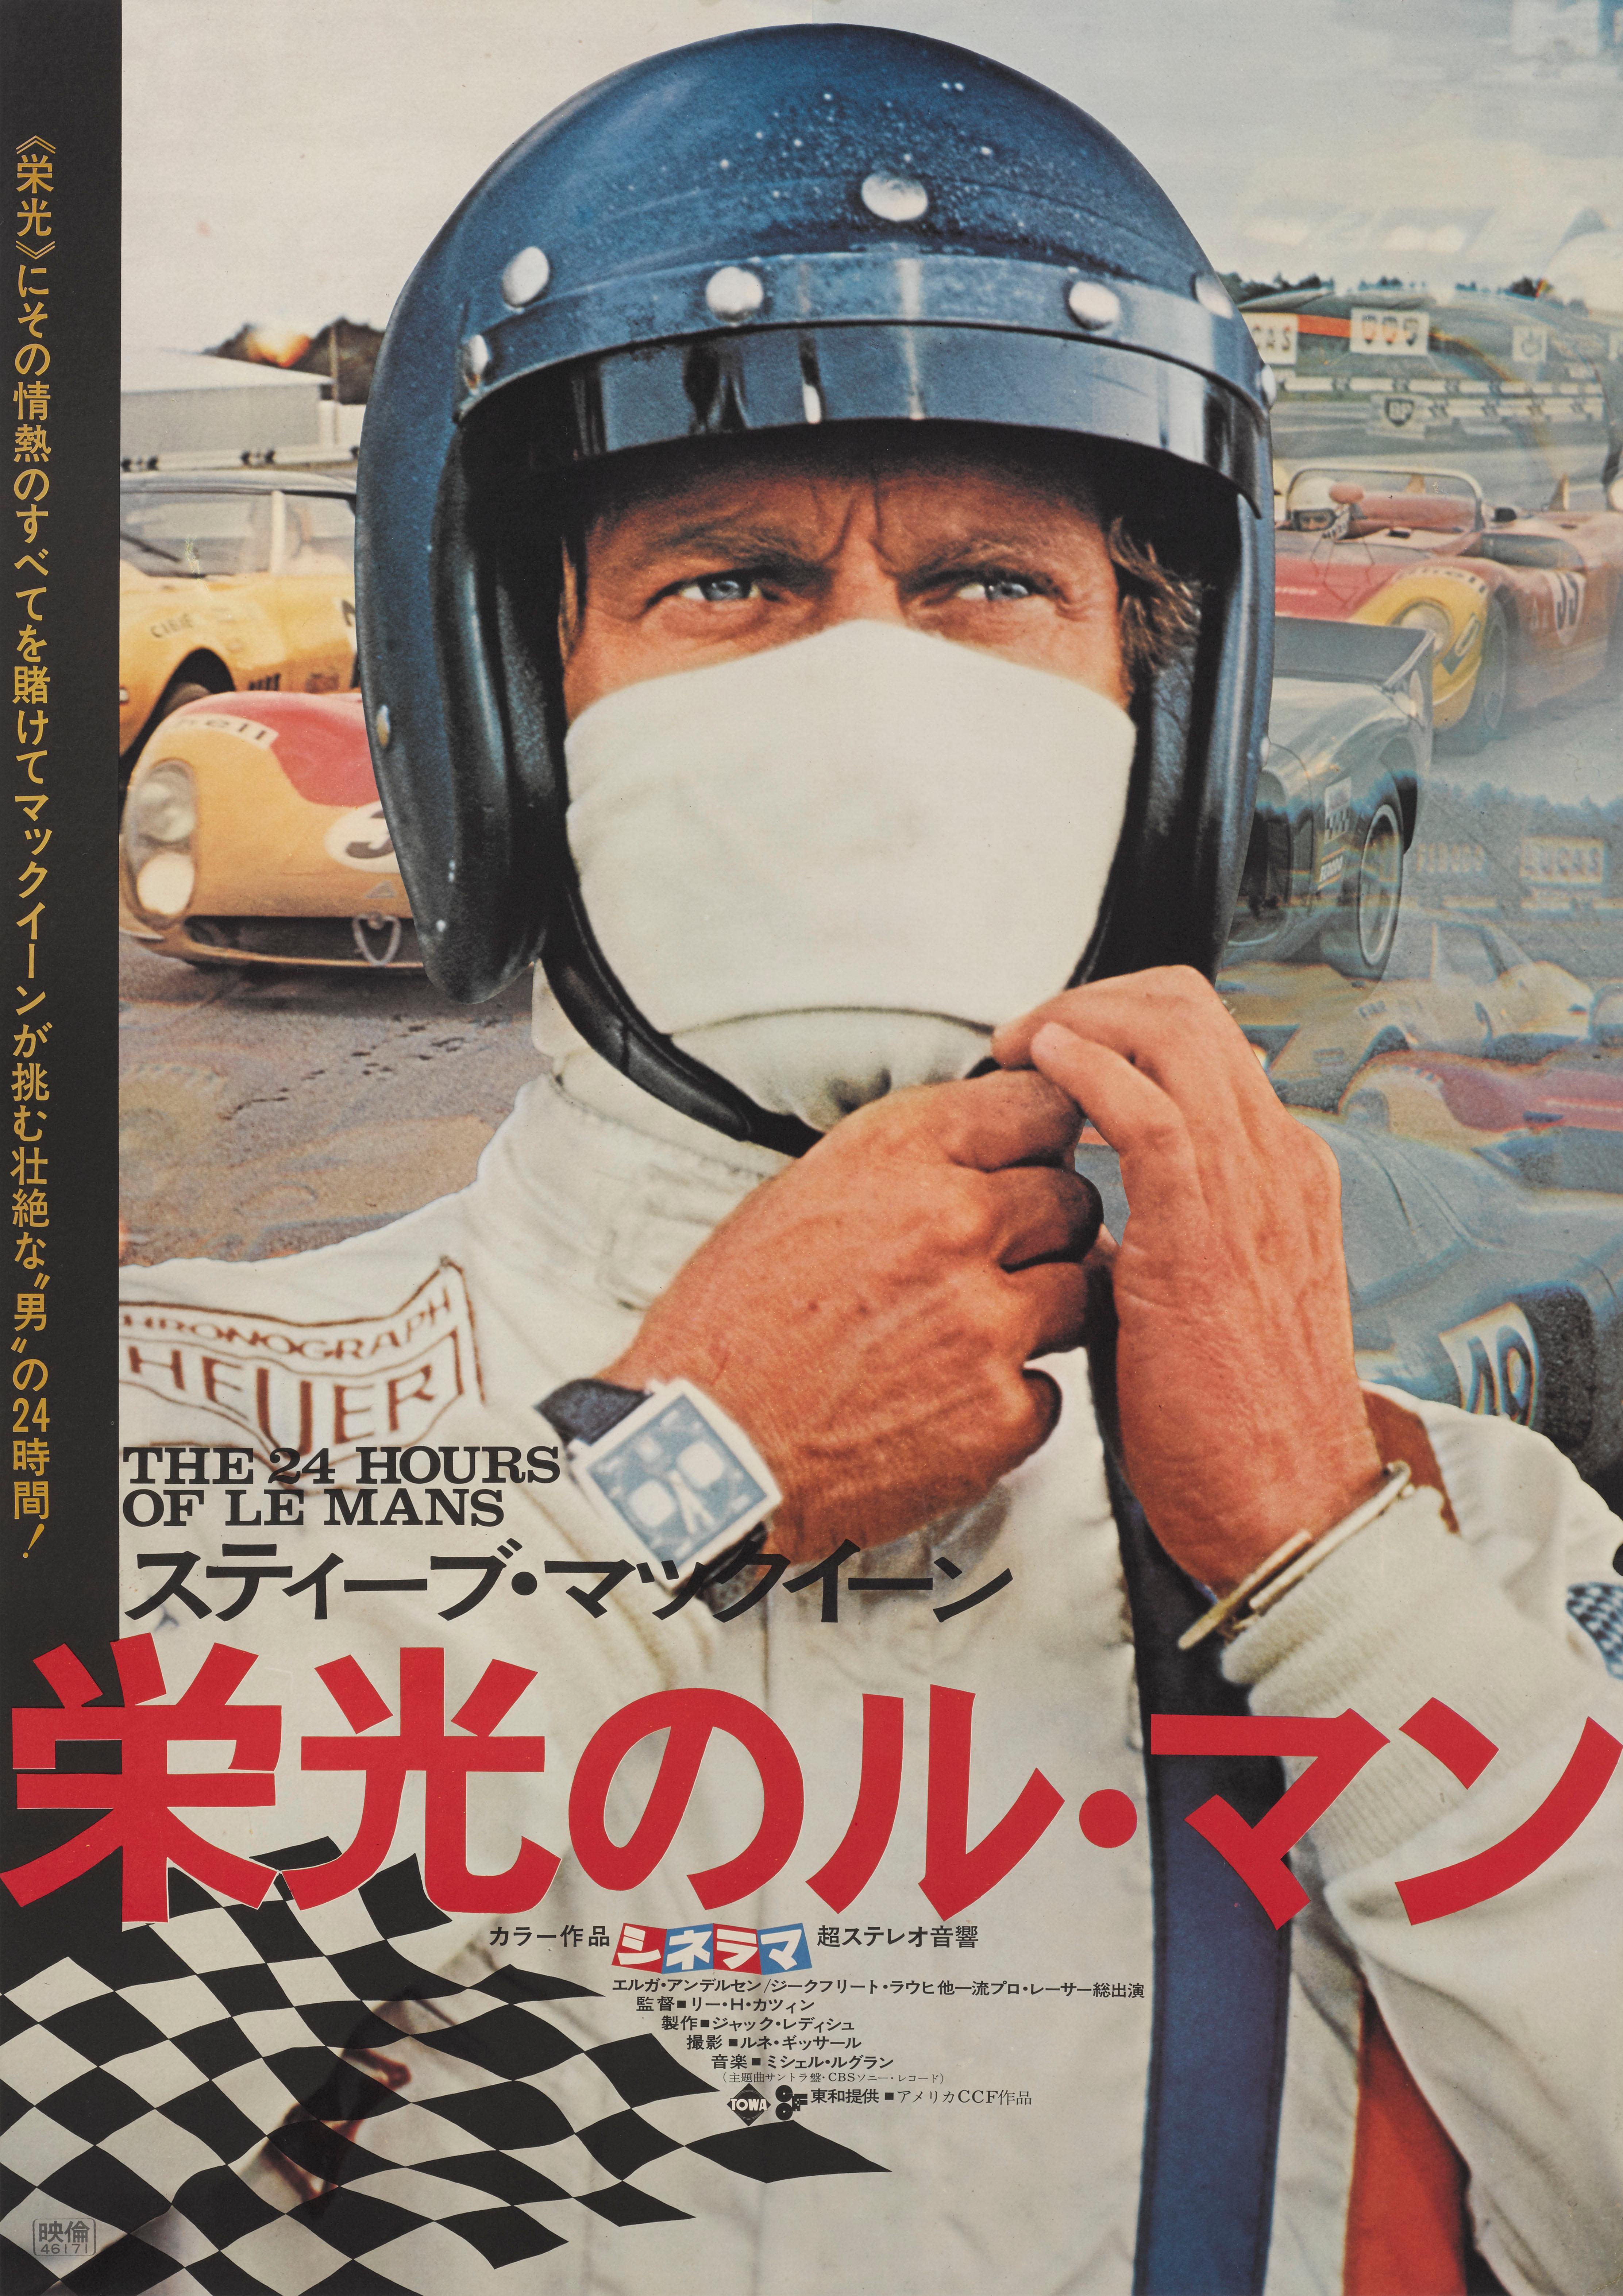 Original Japanese film poster from the Classic 1971 Steve McQueen racing film. This poster shows McQueen wearing the Tag Heuer watch. This poster is unfolded and conservation linen backed and would be shipped rolled in a strong tube.